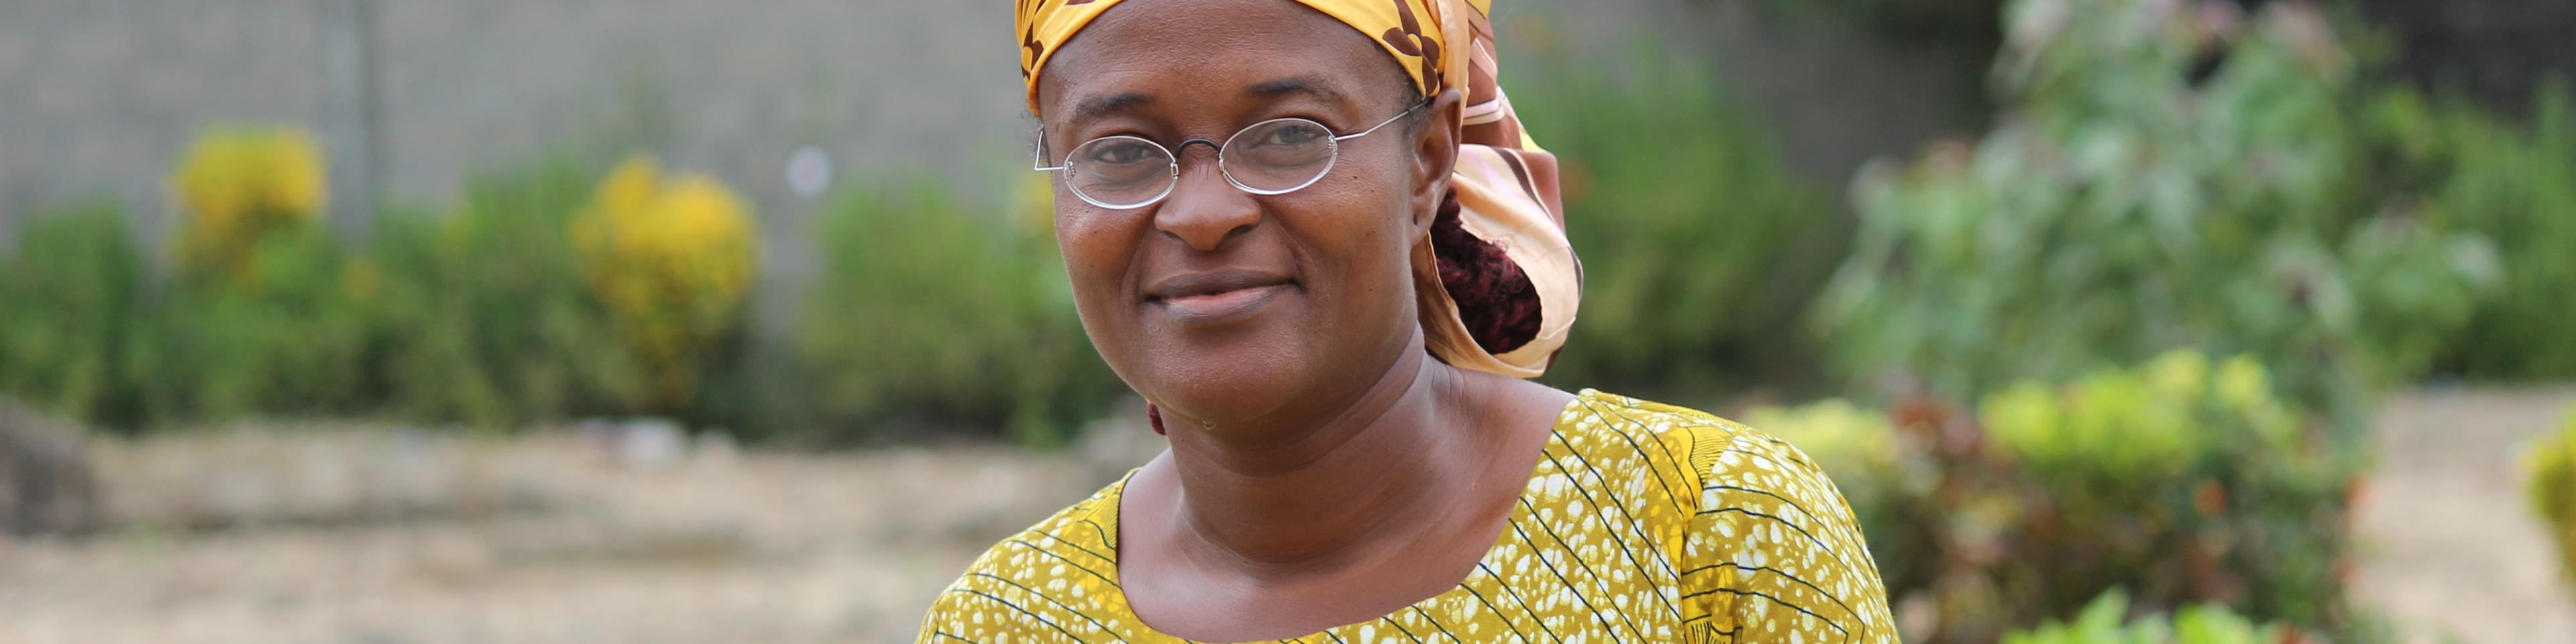 Traditionally dressed woman from Liberia with OneDollarGlasses